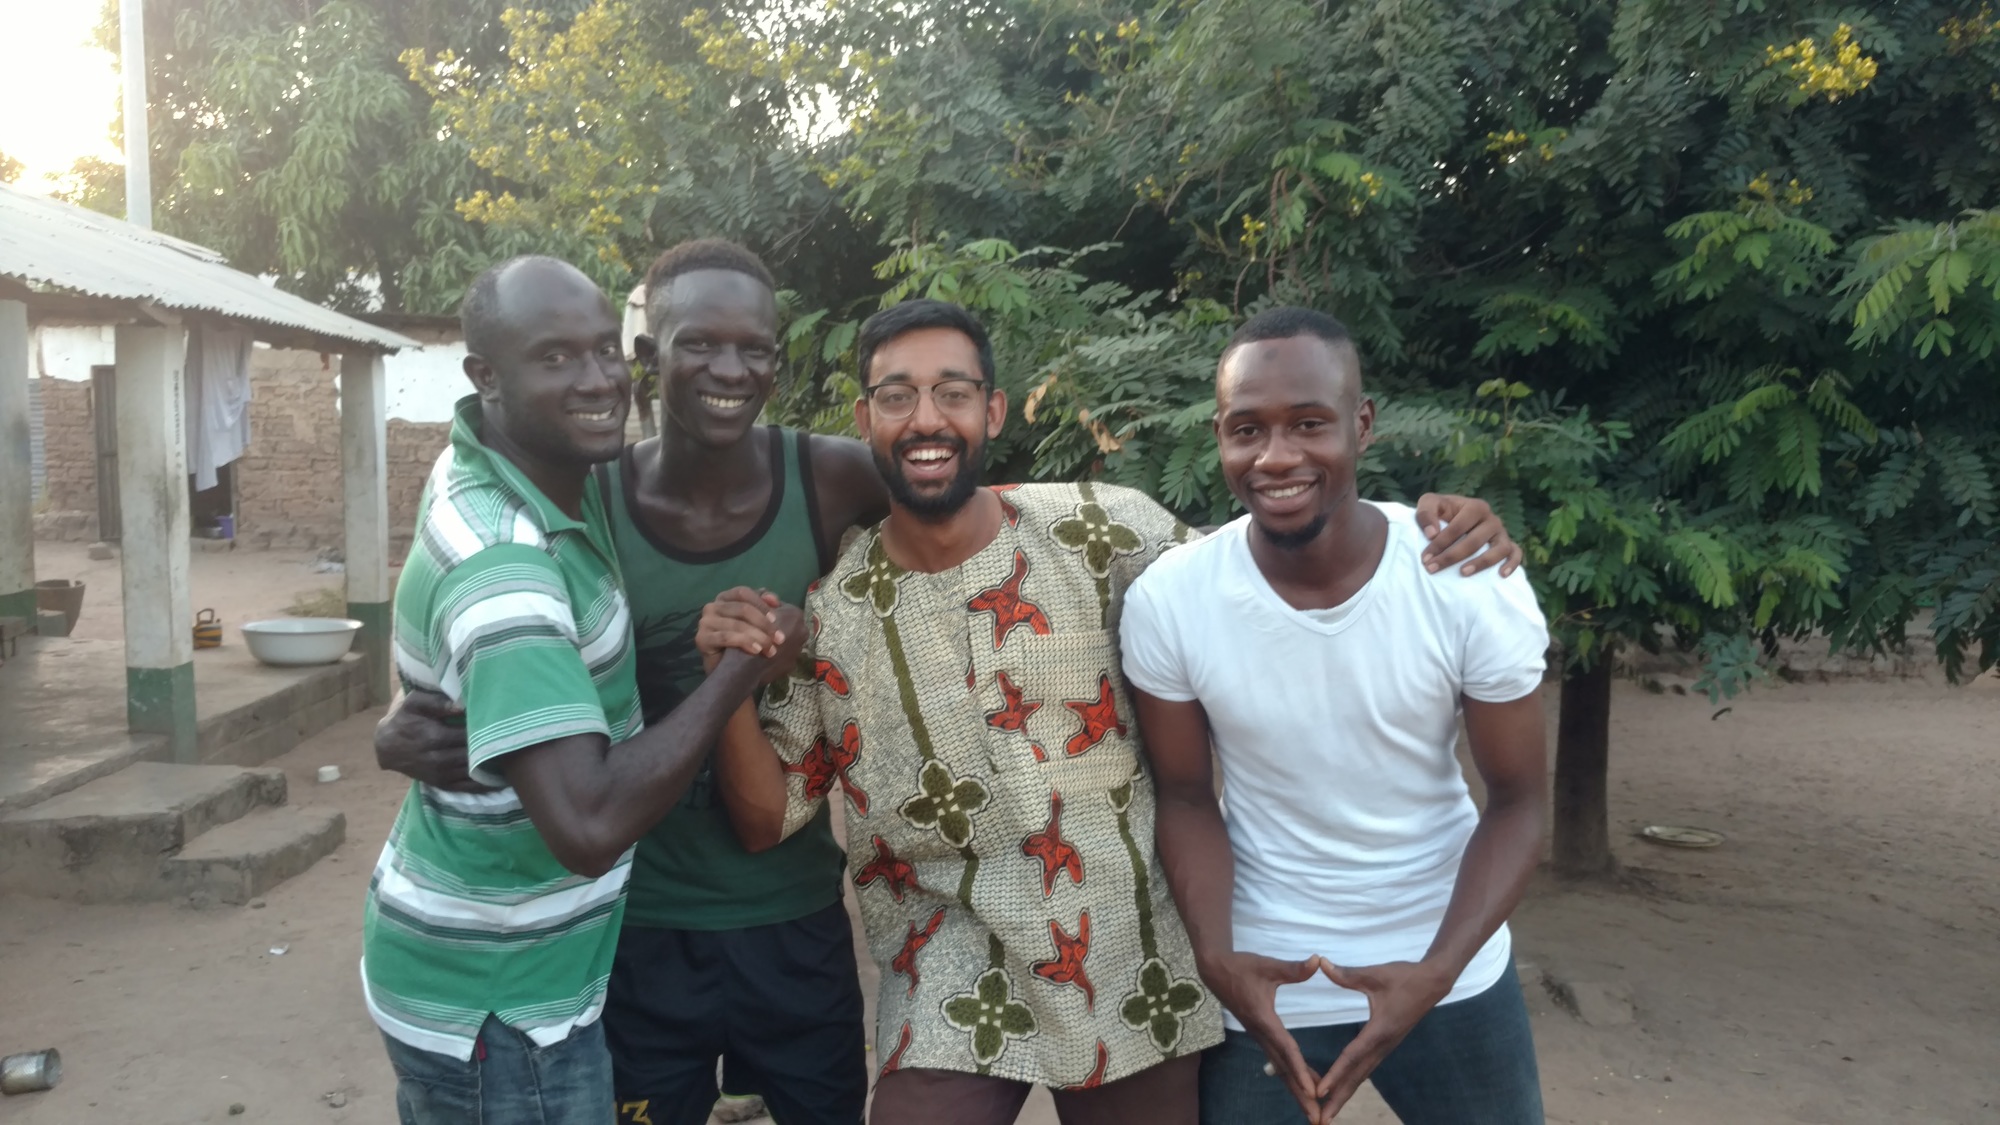 West Orange High graduate Rehan Khan, center, loves having a positive impact on the lives of people in The Gambia.